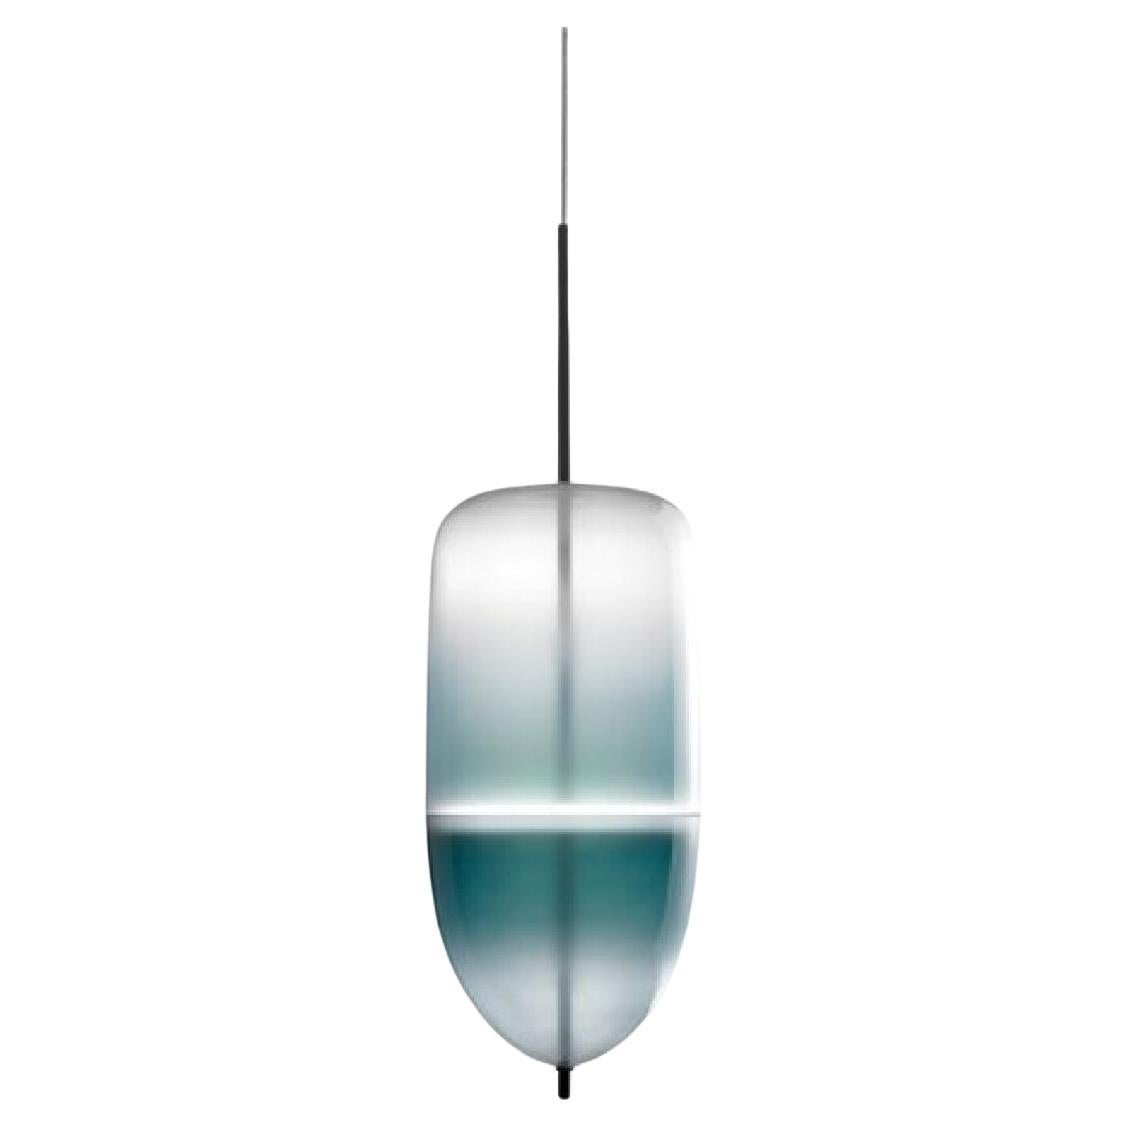 FLOW[T] S5 Pendant lamp in Turquoise by Nao Tamura for Wonderglass For Sale